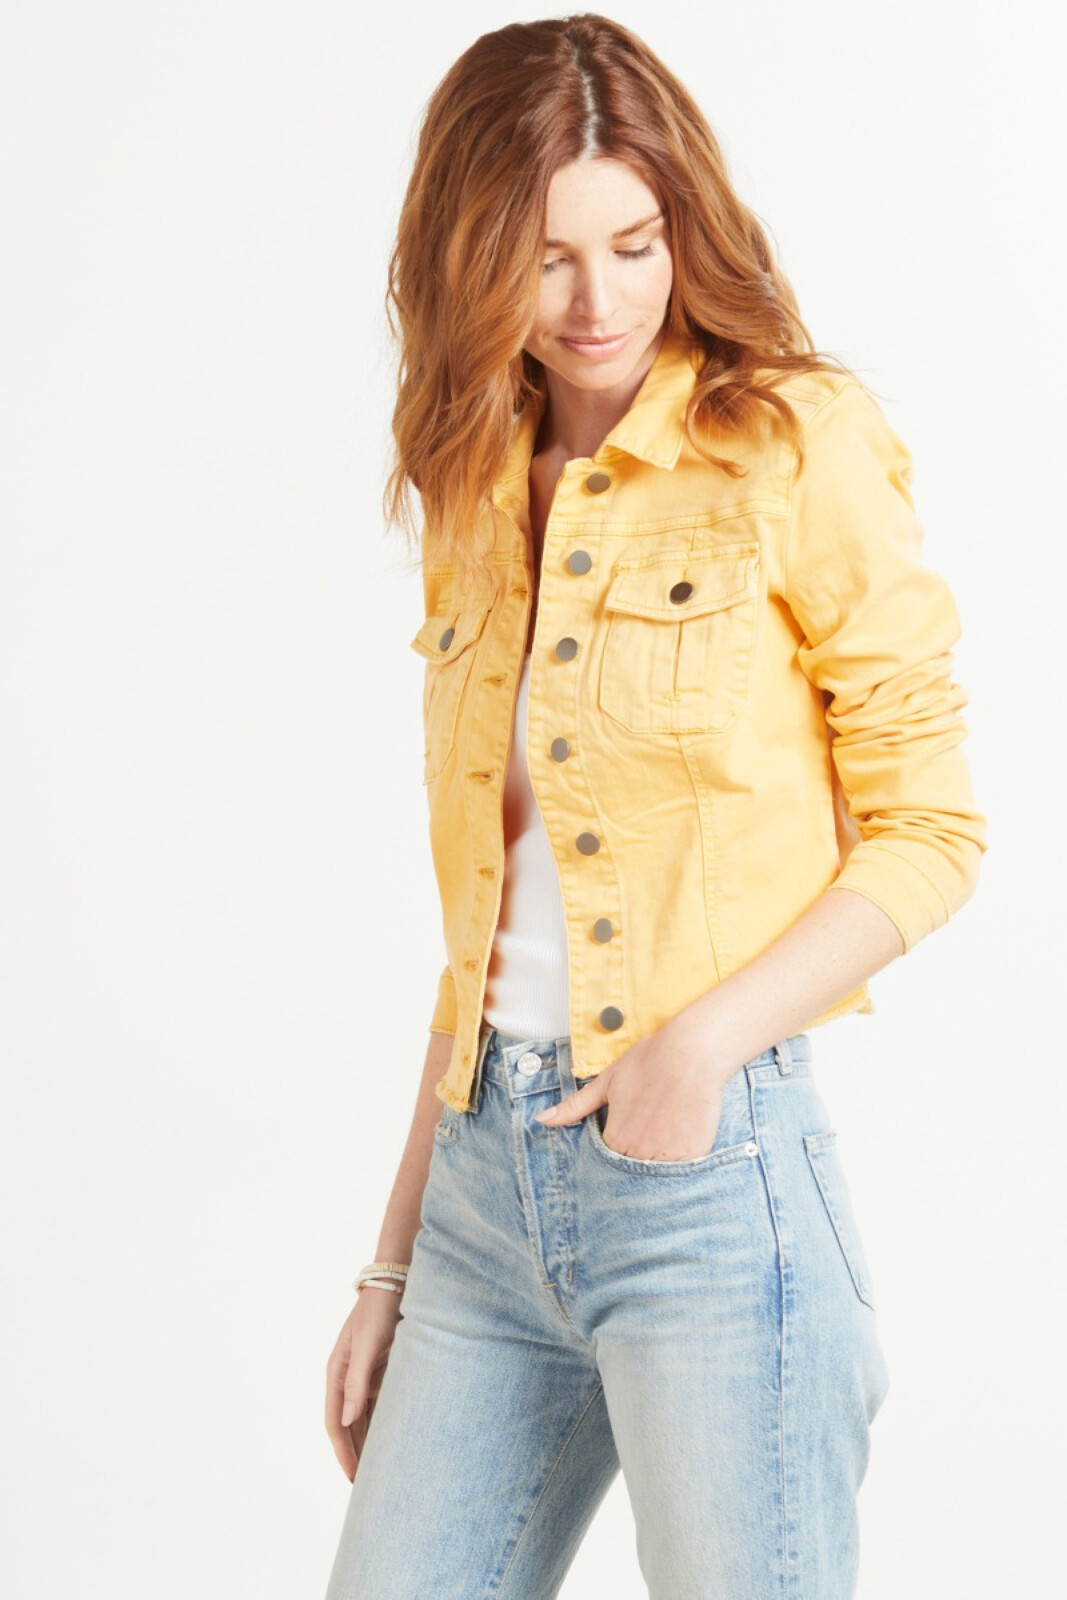 jeans yellow jacket,SAVE 7% 